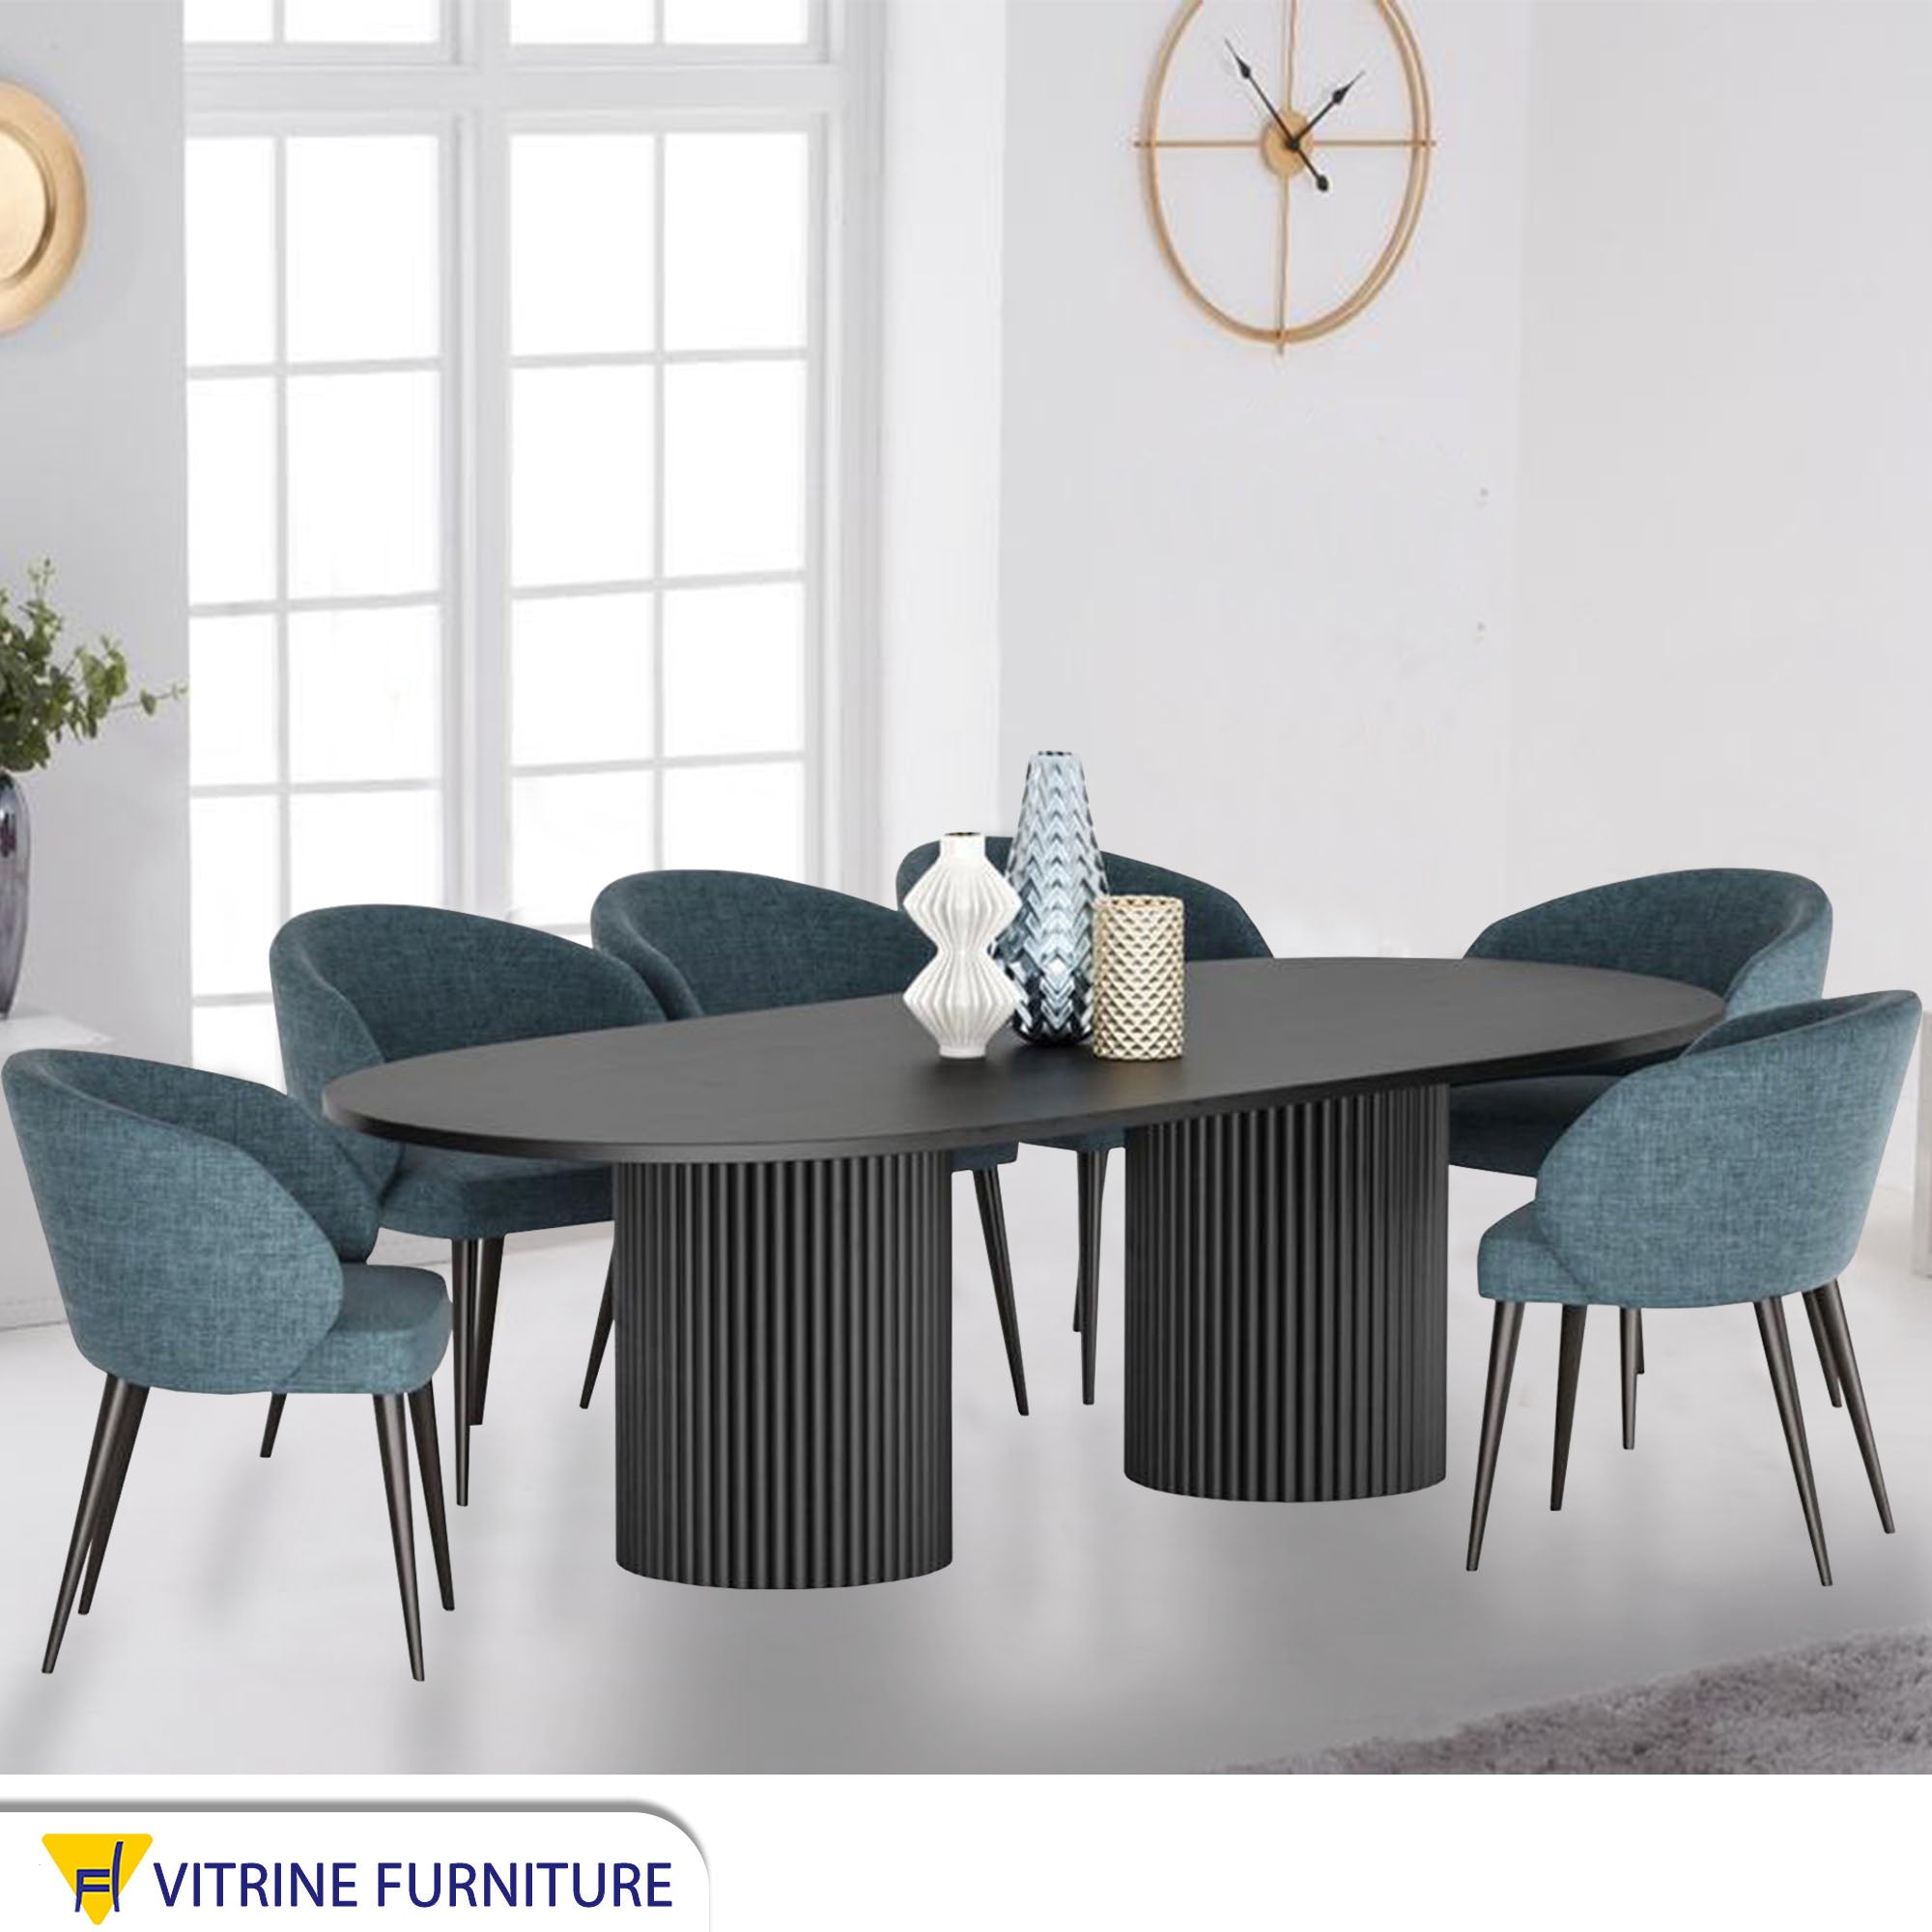 Dining table with cylindrical legs in black